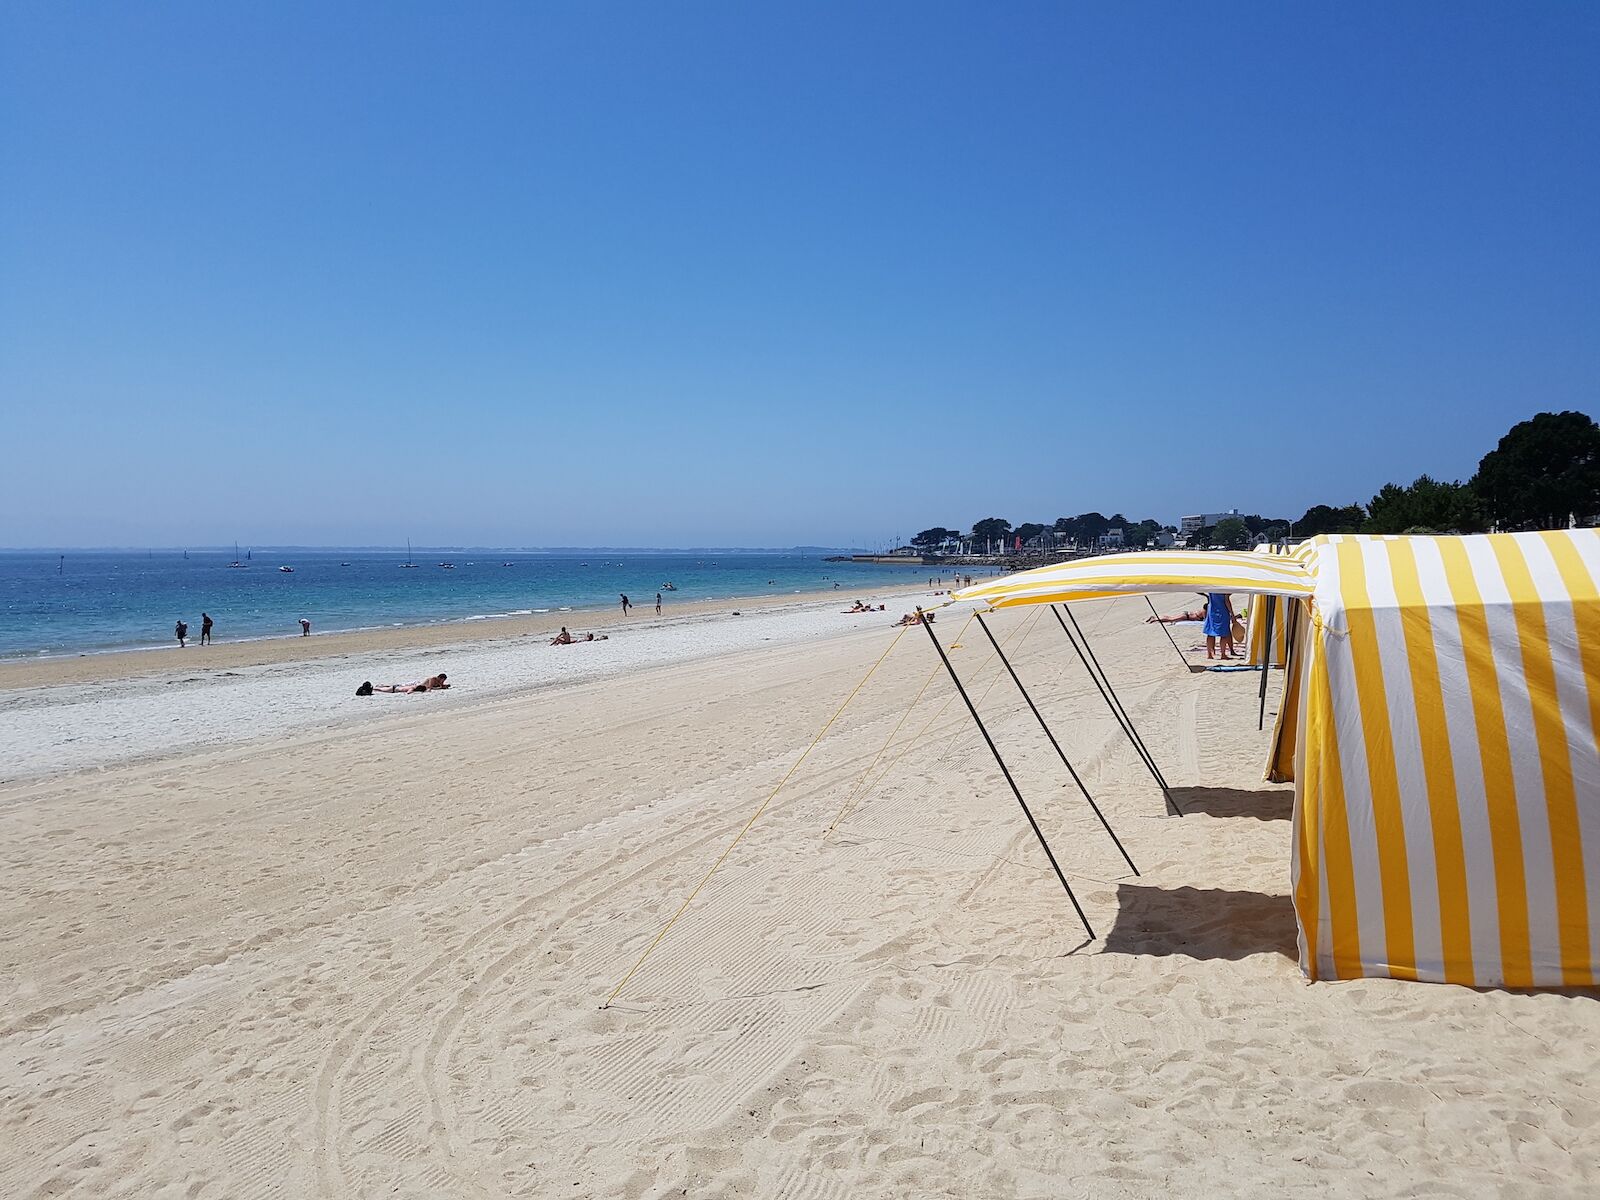 La Grande Plage de Carnac is one of the best French beaches